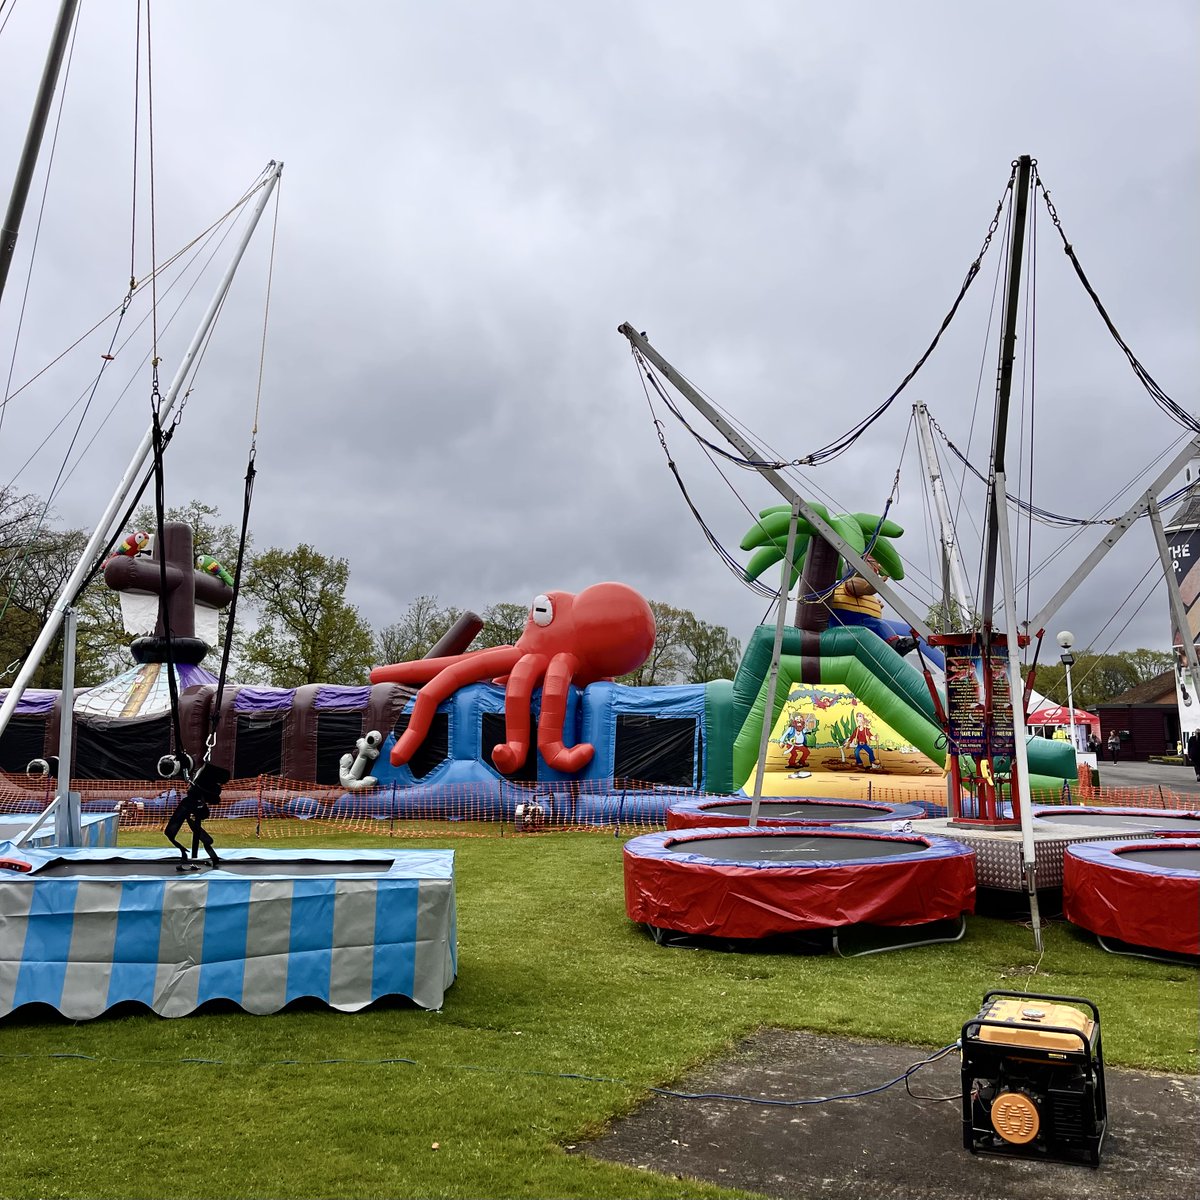 Sunny or not, we will deliver you an amazing Corporate Fun Days! 🌞 We own and operate all our equipment.

Our new Basketball Inflatable is a huge hit with the crowds this year!🏀

Explore our full range of equipment, entertainers and food options at teamchallenge-company.co.uk/corporate-fun-…